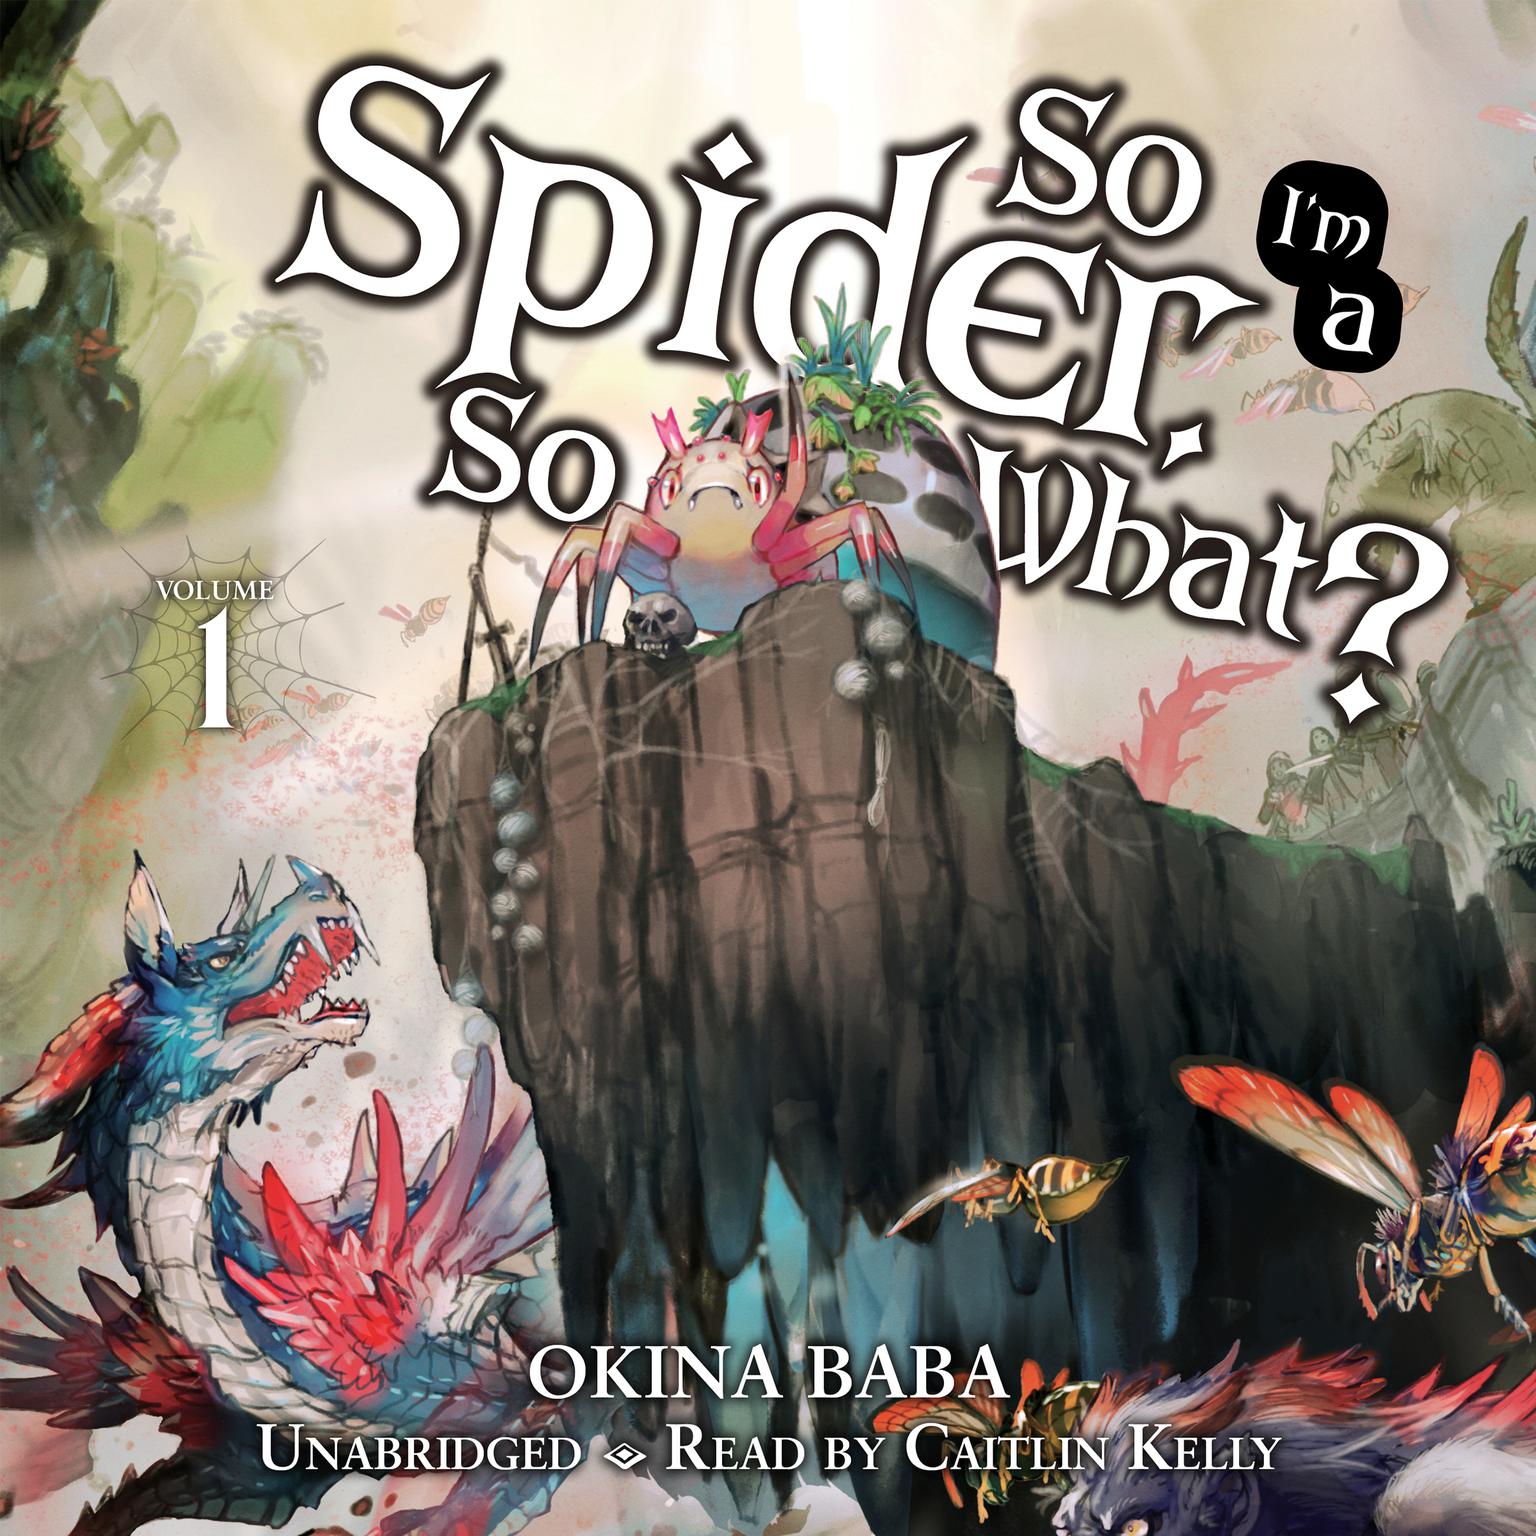 Available Now! So I’m A Spider, So What?, Vol. 1 Audiobook